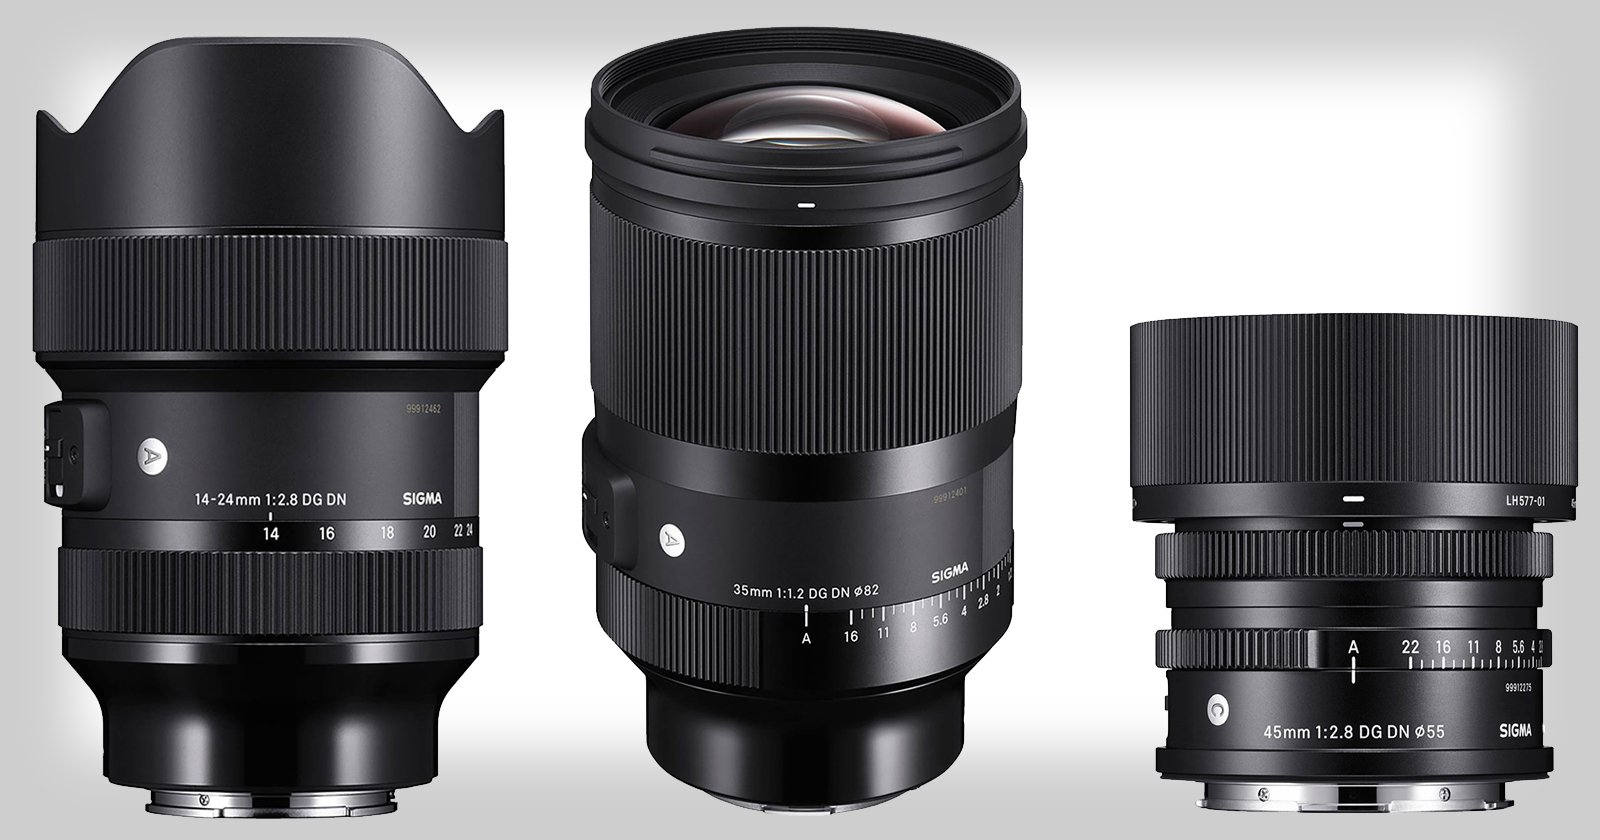 Sigma Debuts 3 Full-Frame Mirrorless Lenses, Including Their First f/1.2 Lens